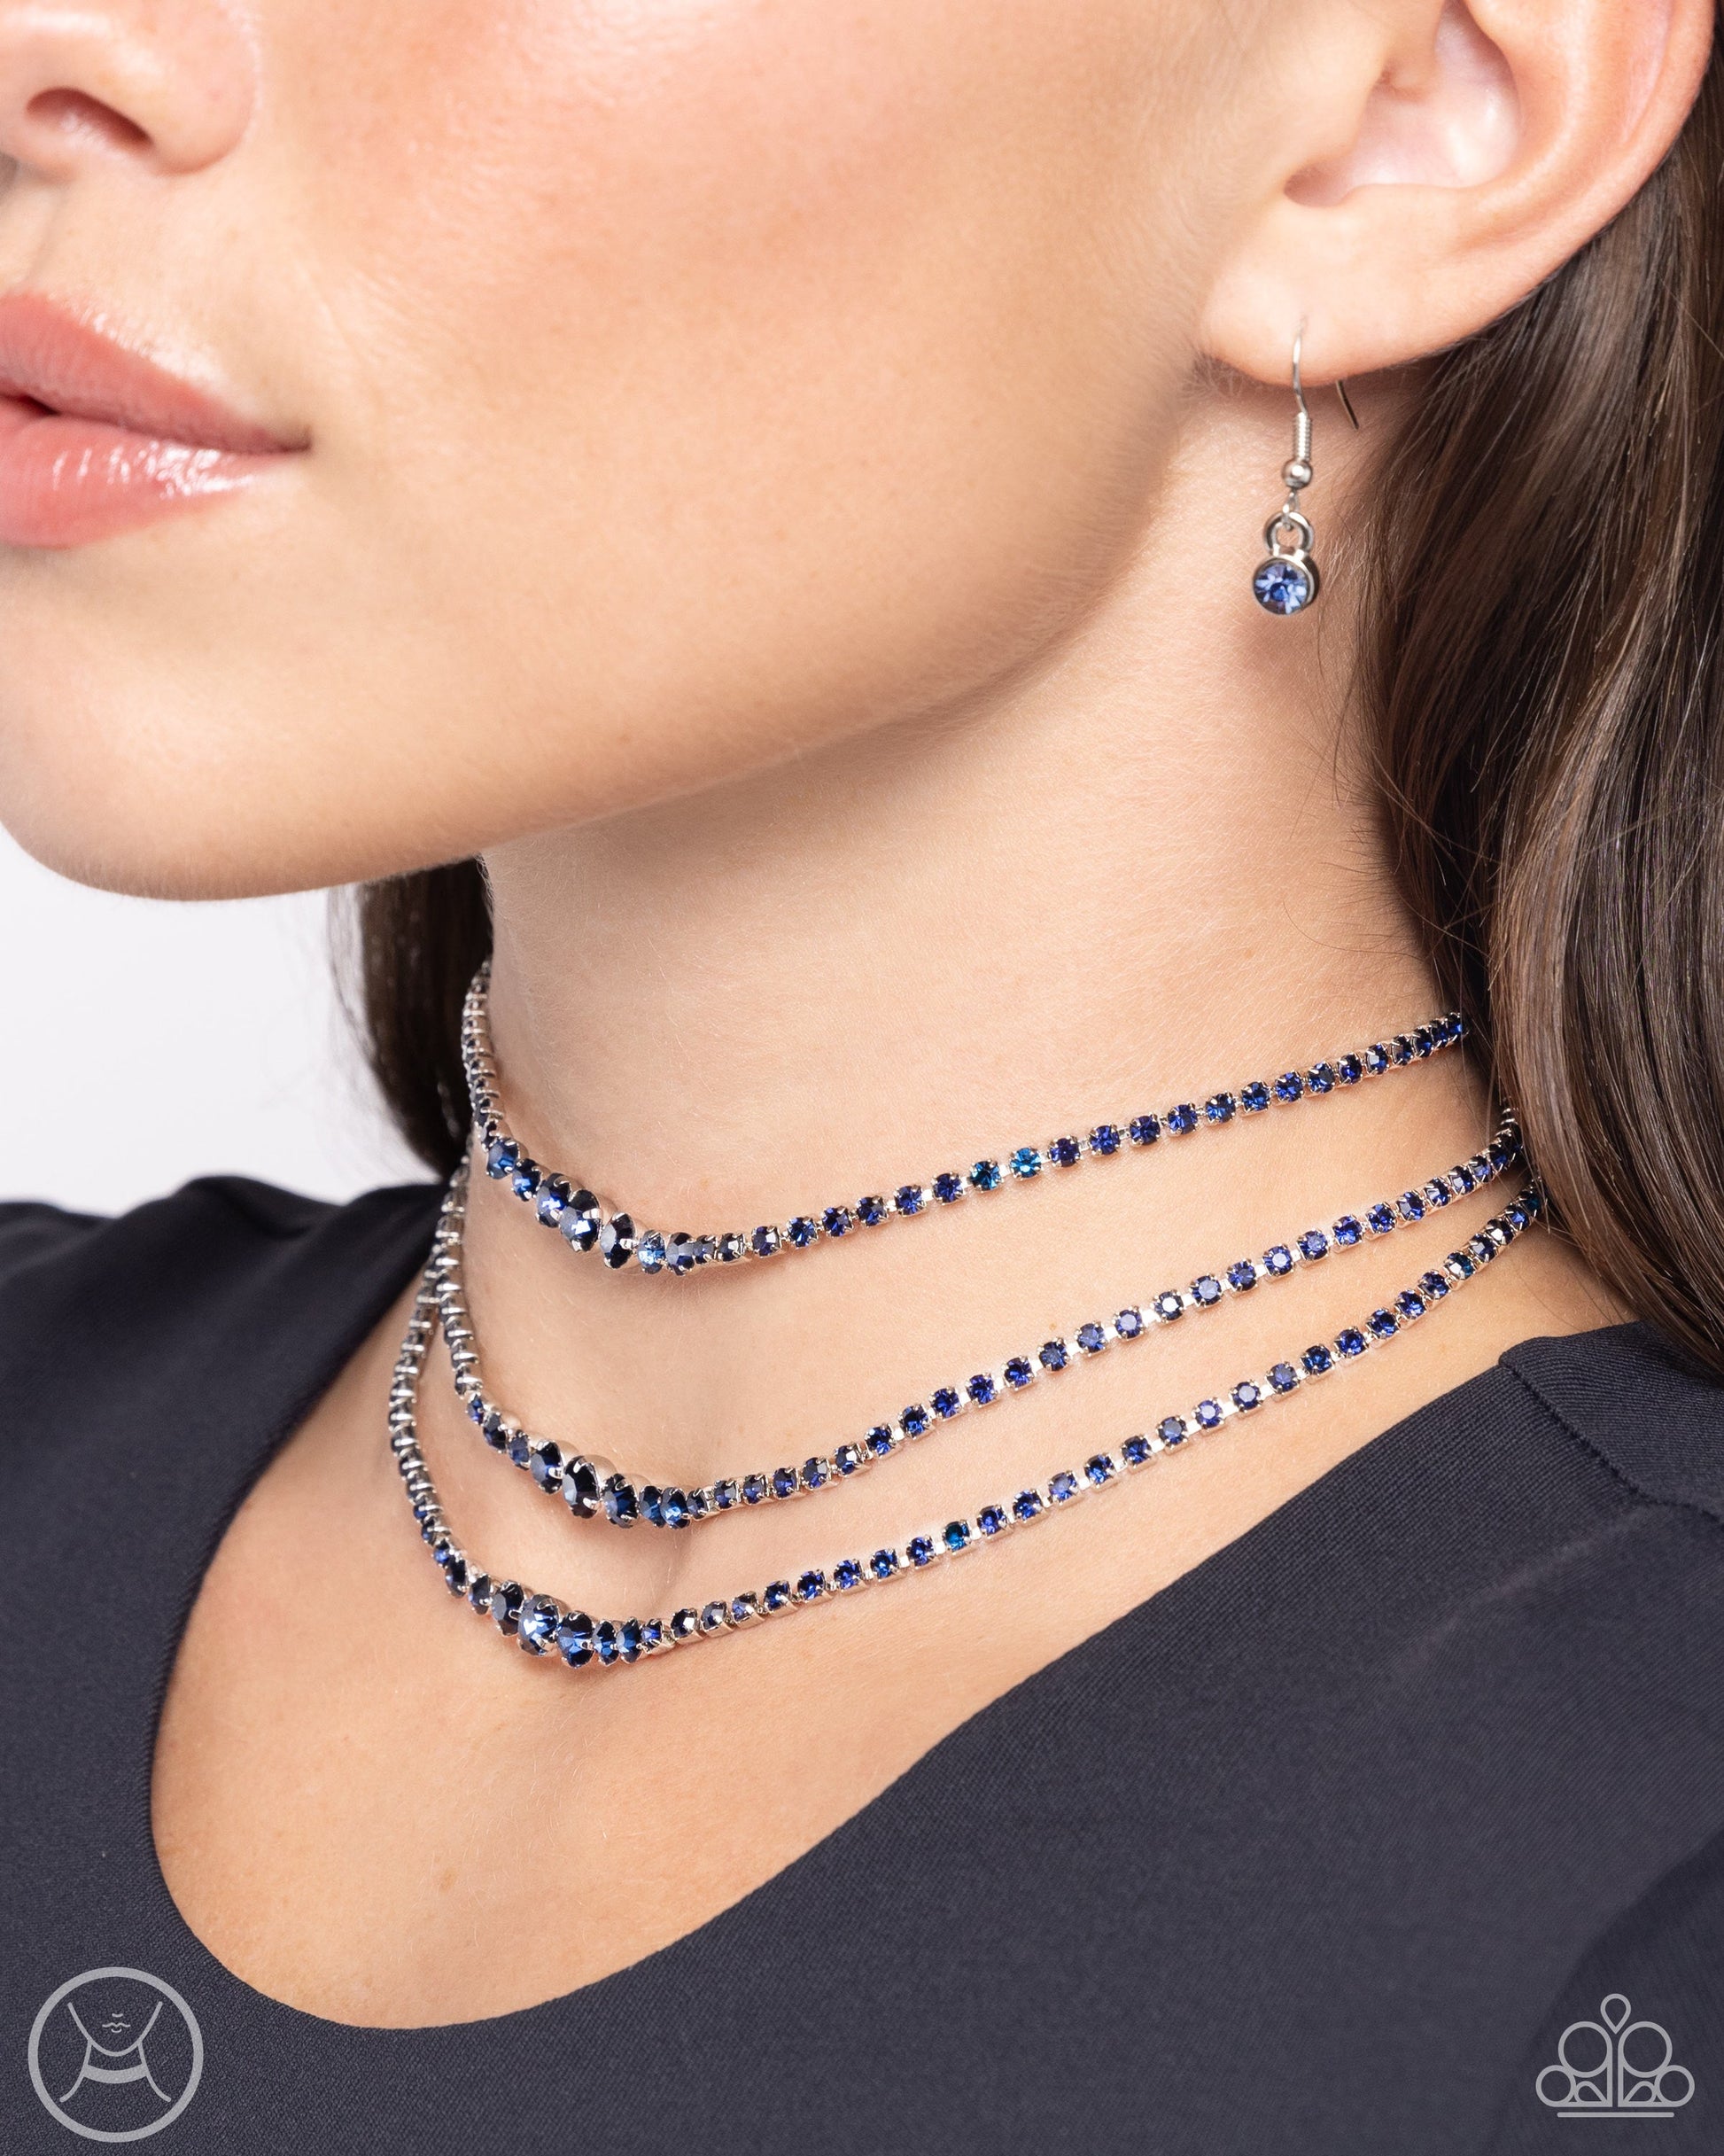 Dynamite Debut - Blue Gem Necklace - Paparazzi Accessories - Set in pronged square silver fittings, blue rhinestones gradually increase to larger blue gems in pronged fittings as they cascade down the chest in a trio of layers for a dynamite display.